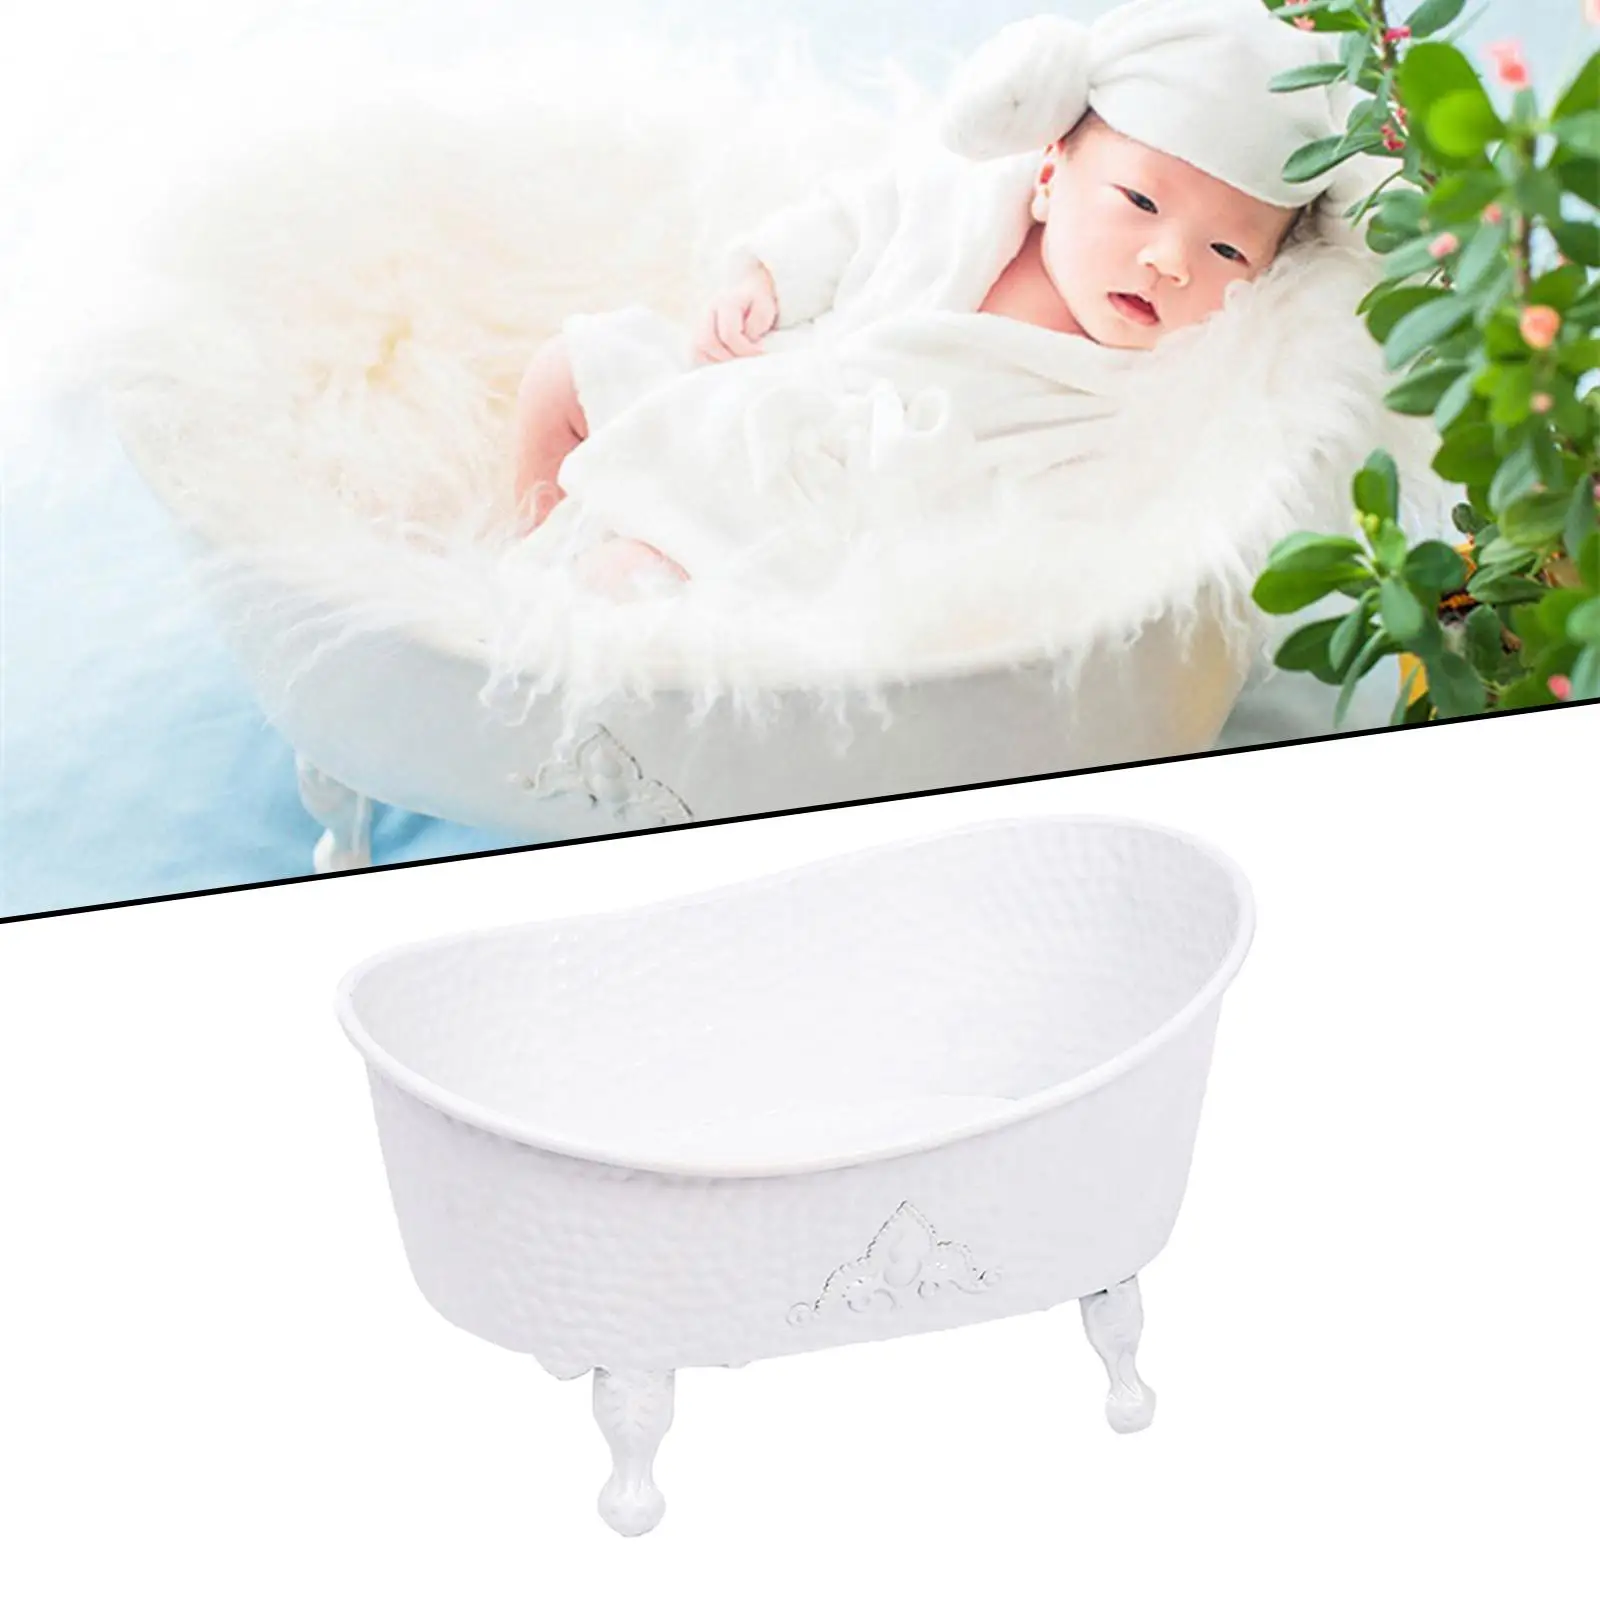 Photo Props Bathtub Accessories Decoration for Newborn Photos Holiday Baby